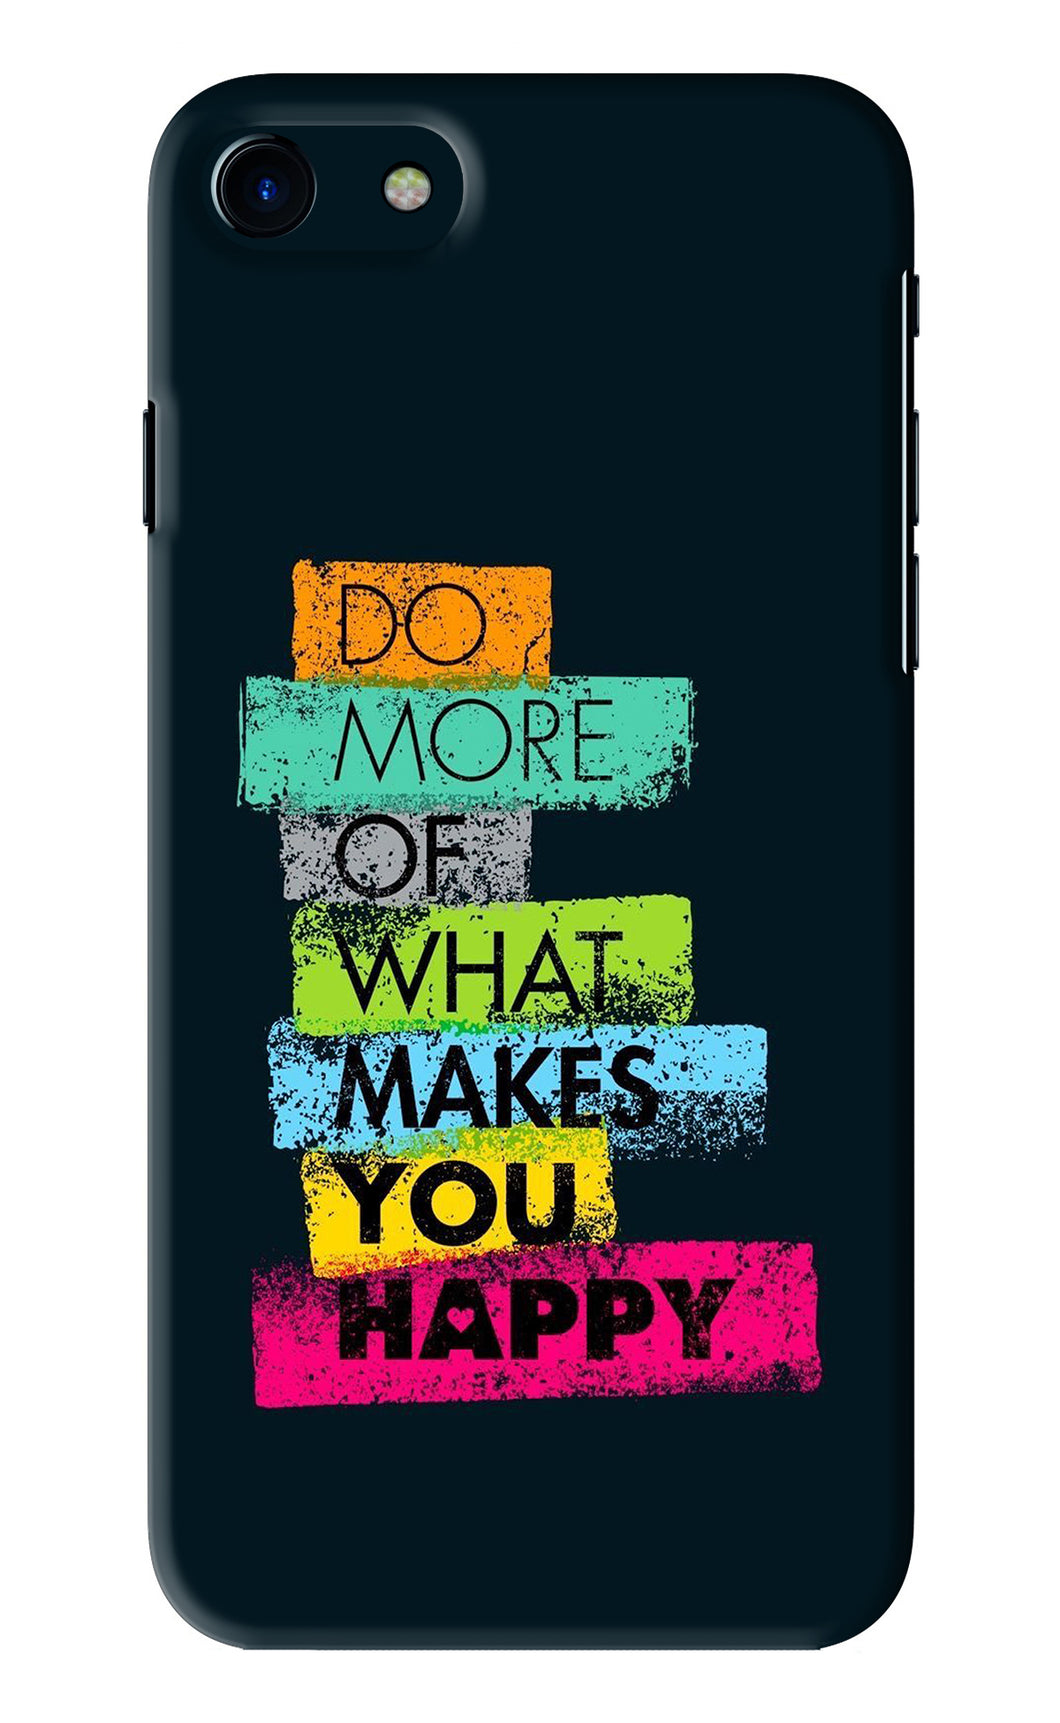 Do More Of What Makes You Happy iPhone 7 Back Skin Wrap